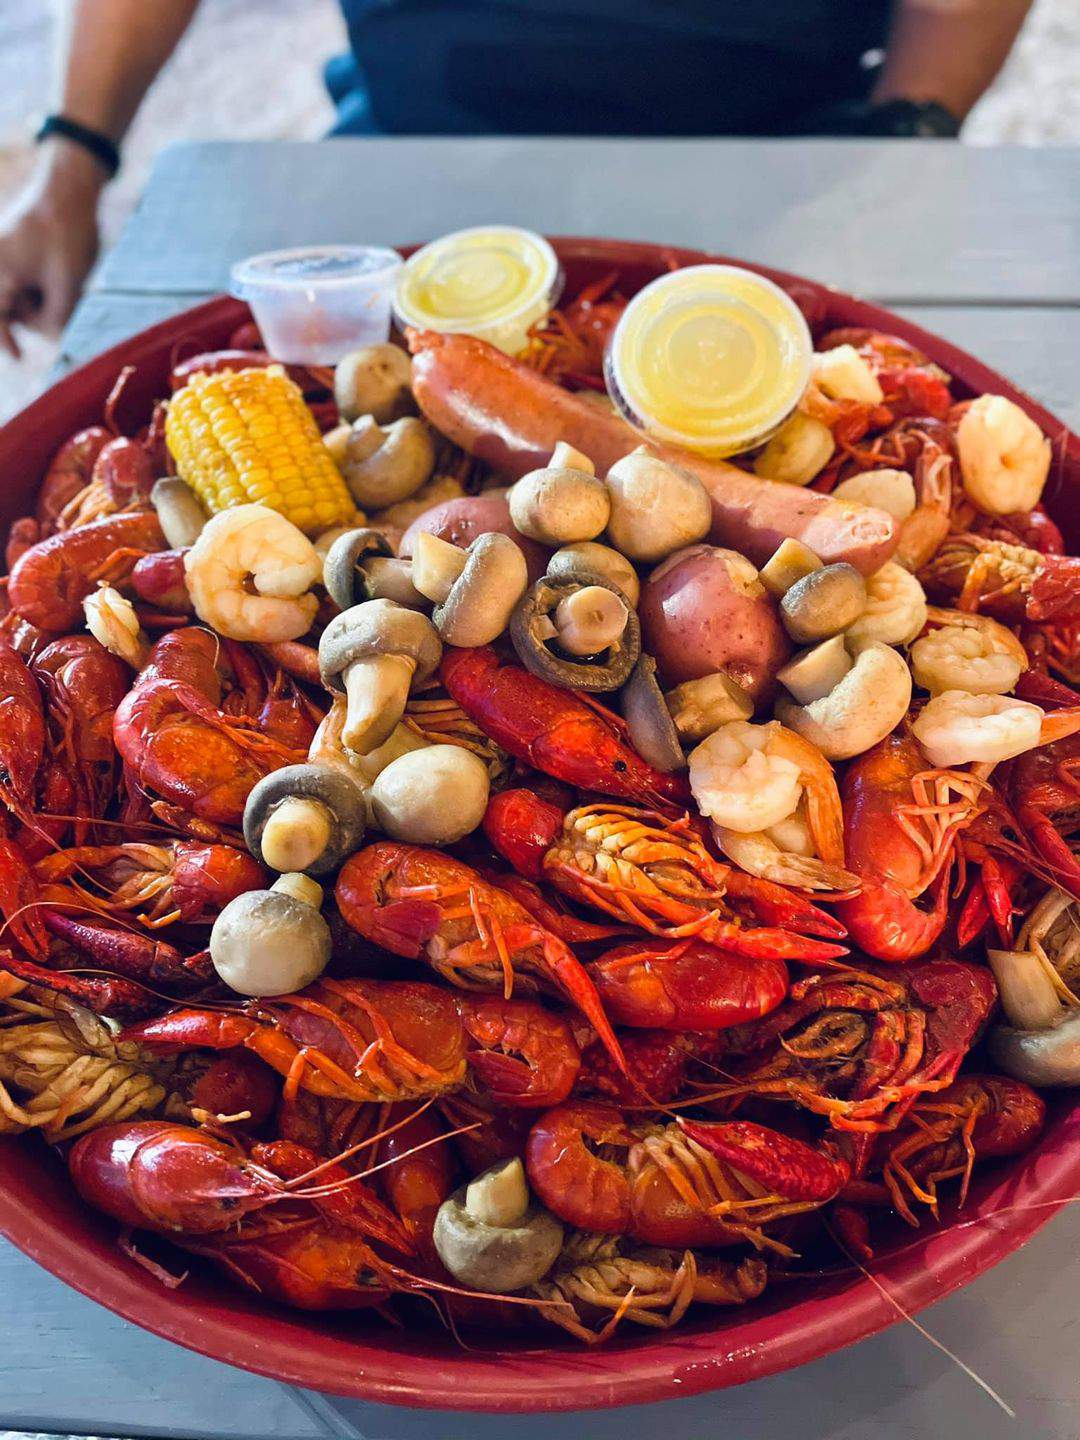 Kingwood-based crawfish and seafood business opens second location in Spring